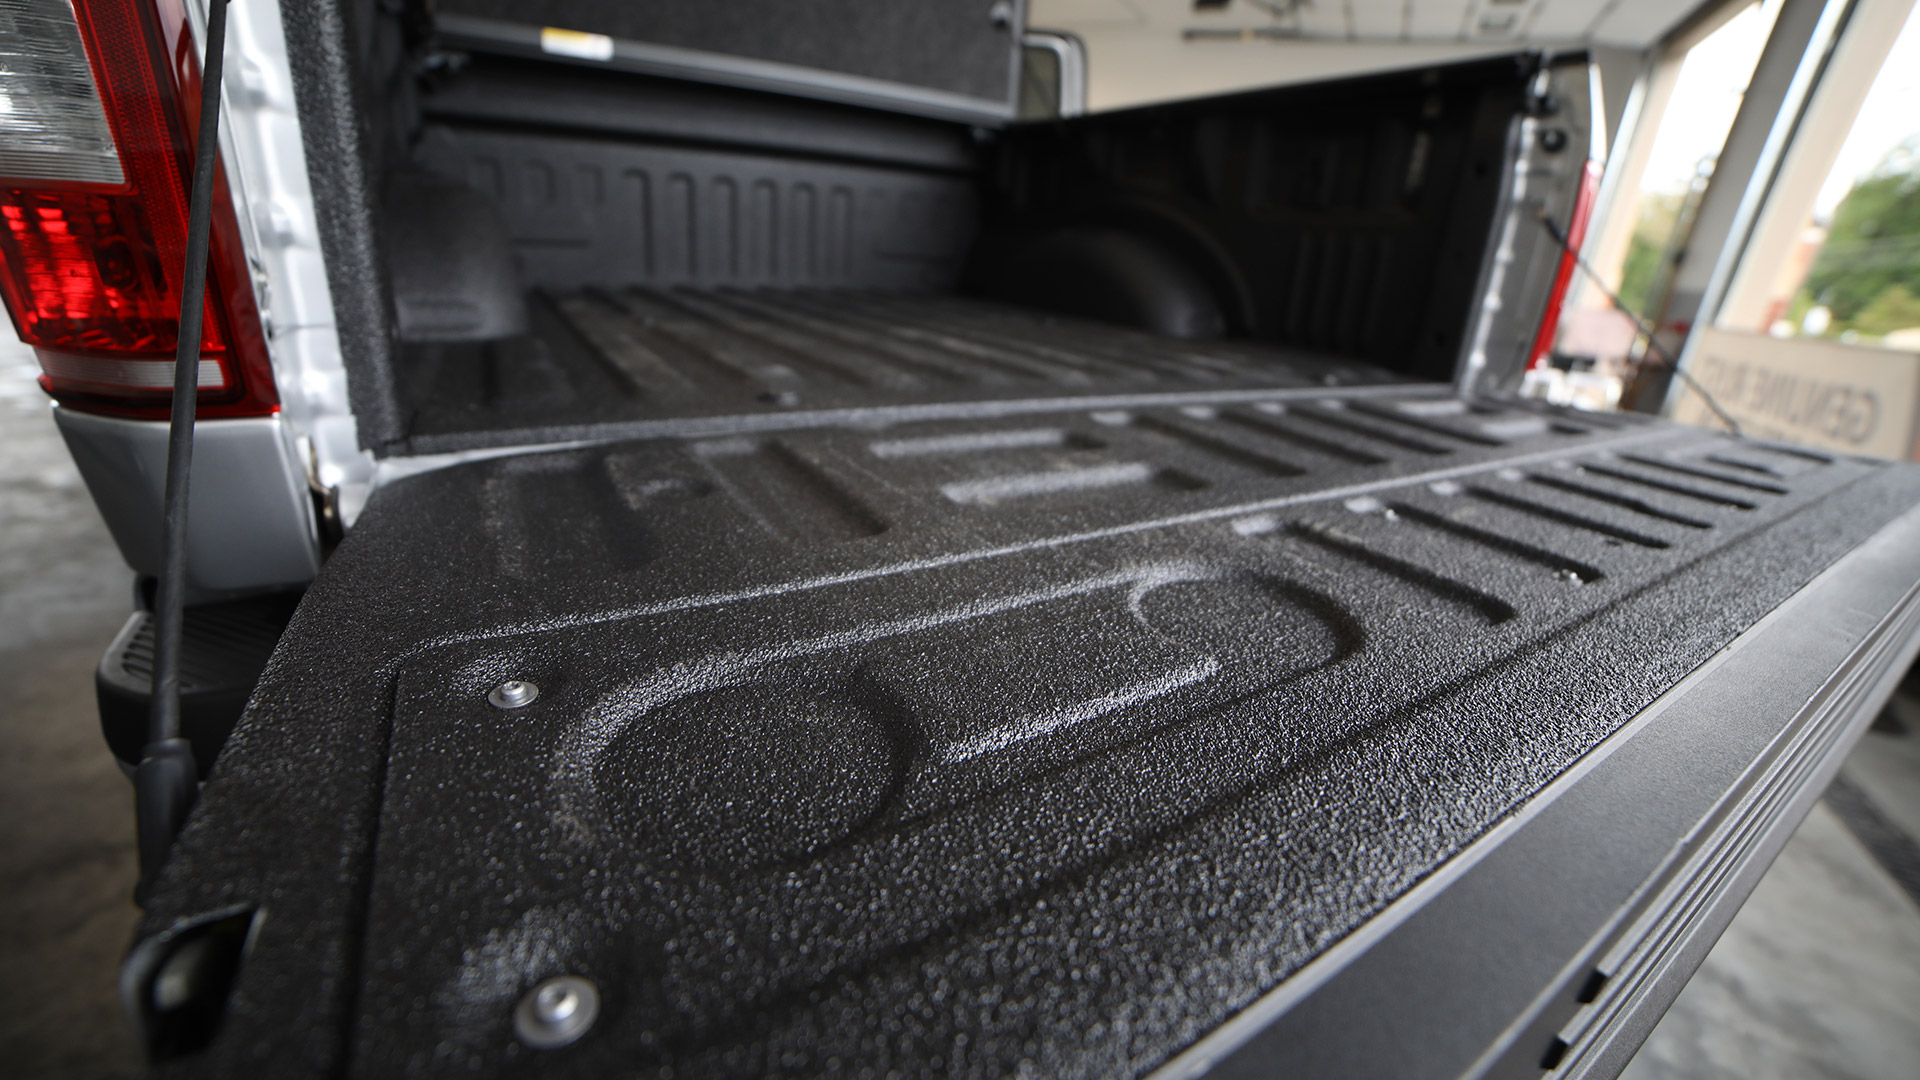 Roll on Bed Liner is Among the Best Ways to Protect Your Truck Bed